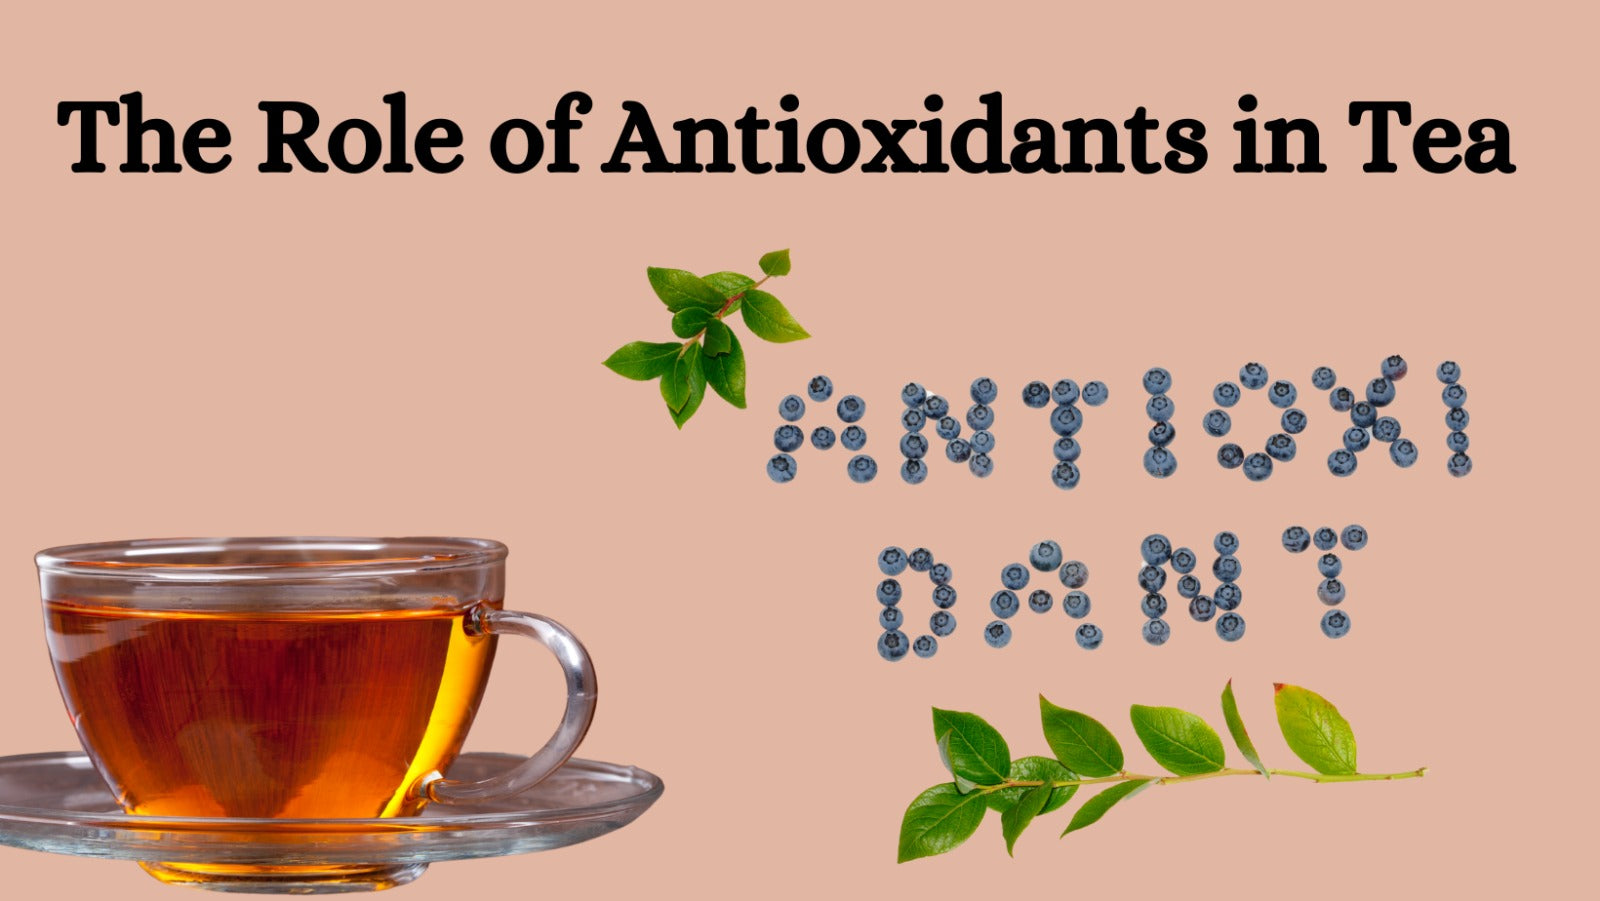 The Role of Antioxidants in Tea